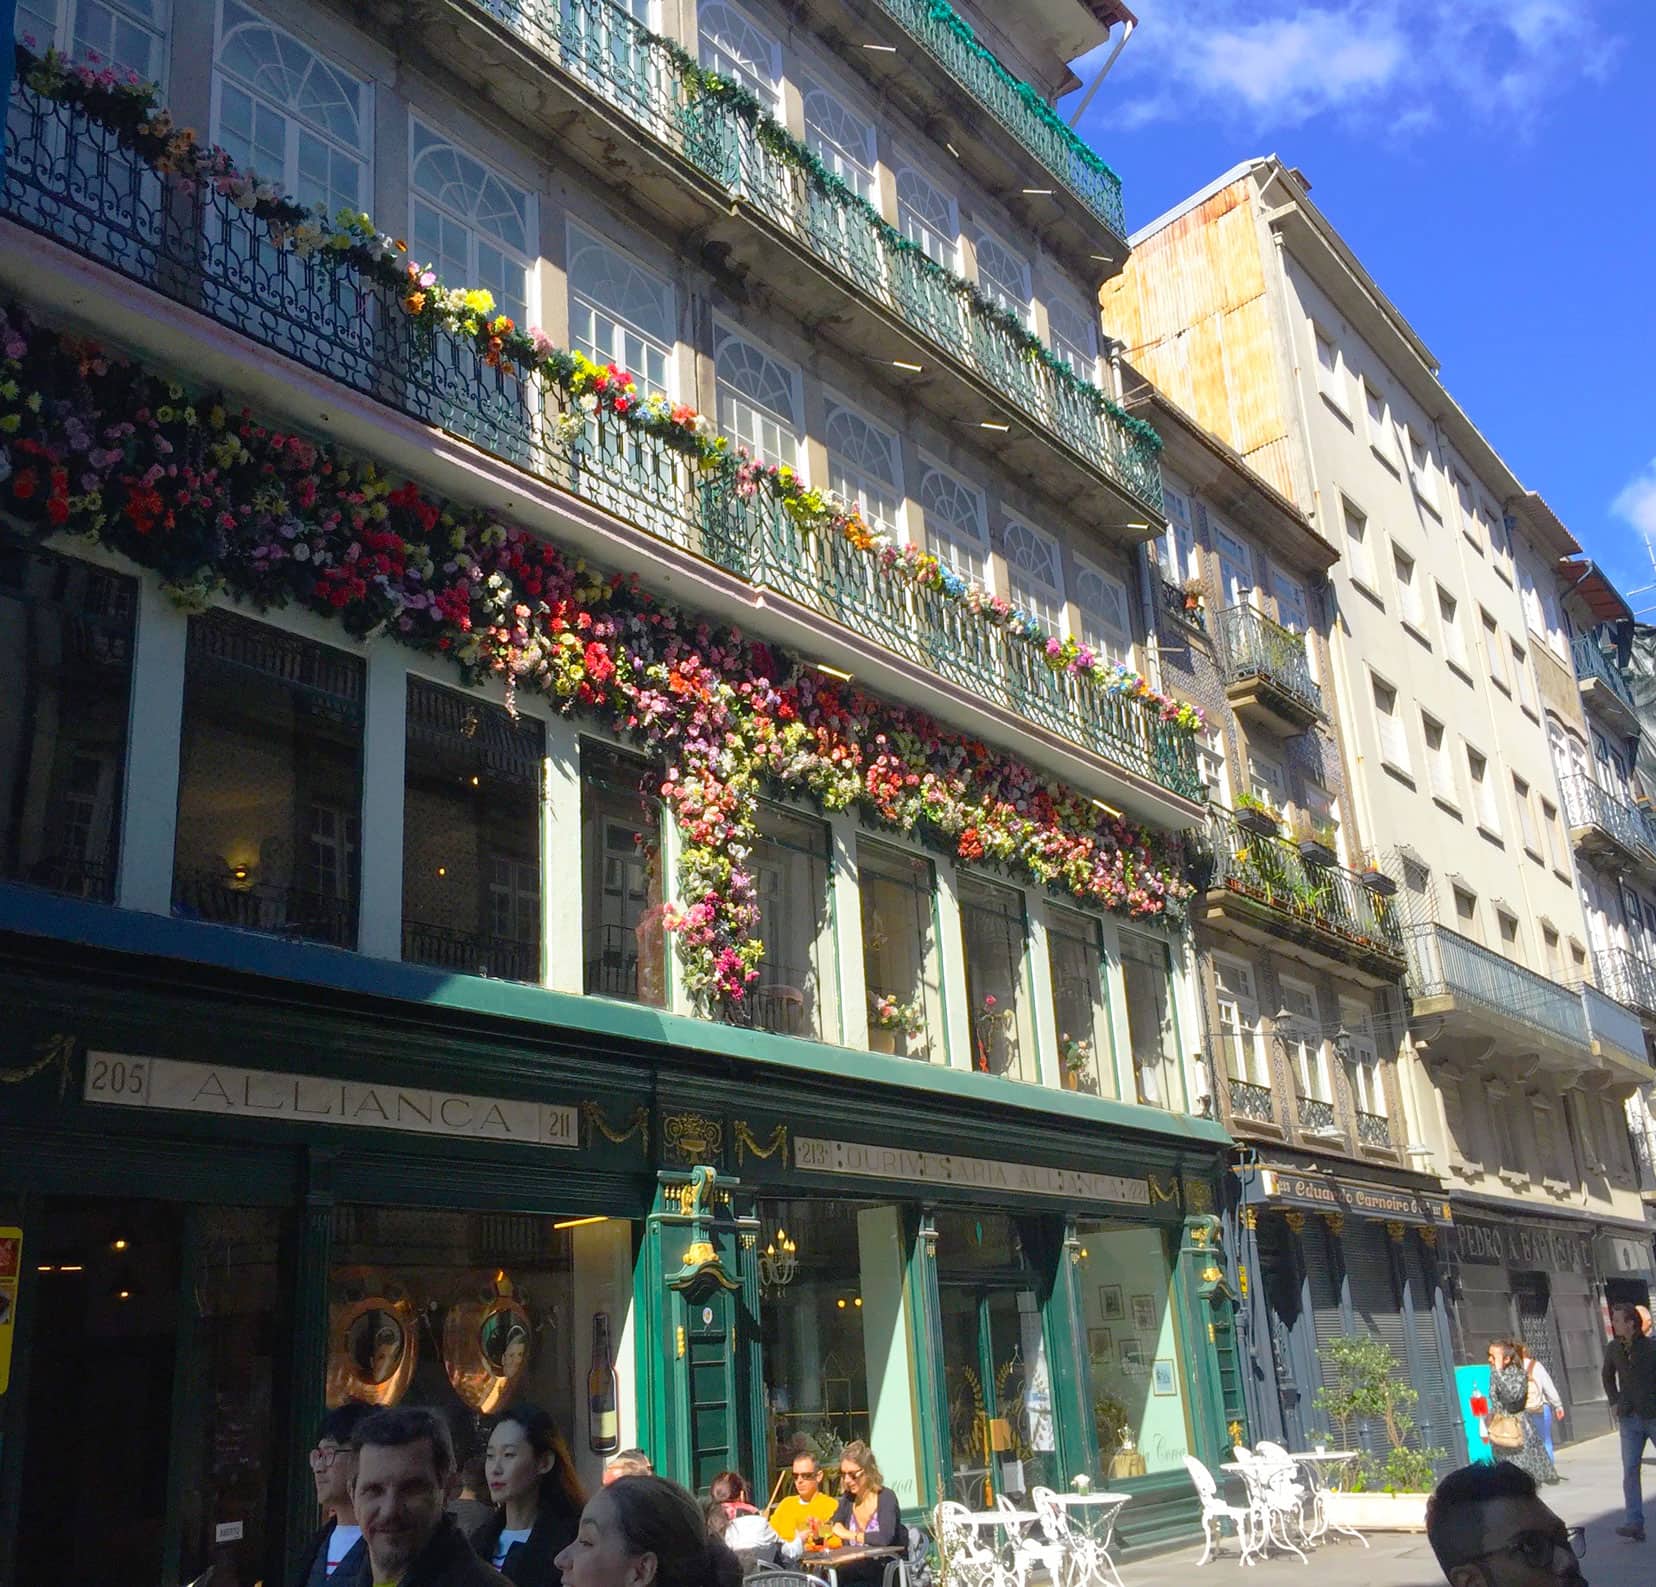 Shops with lots of flowers on the facade